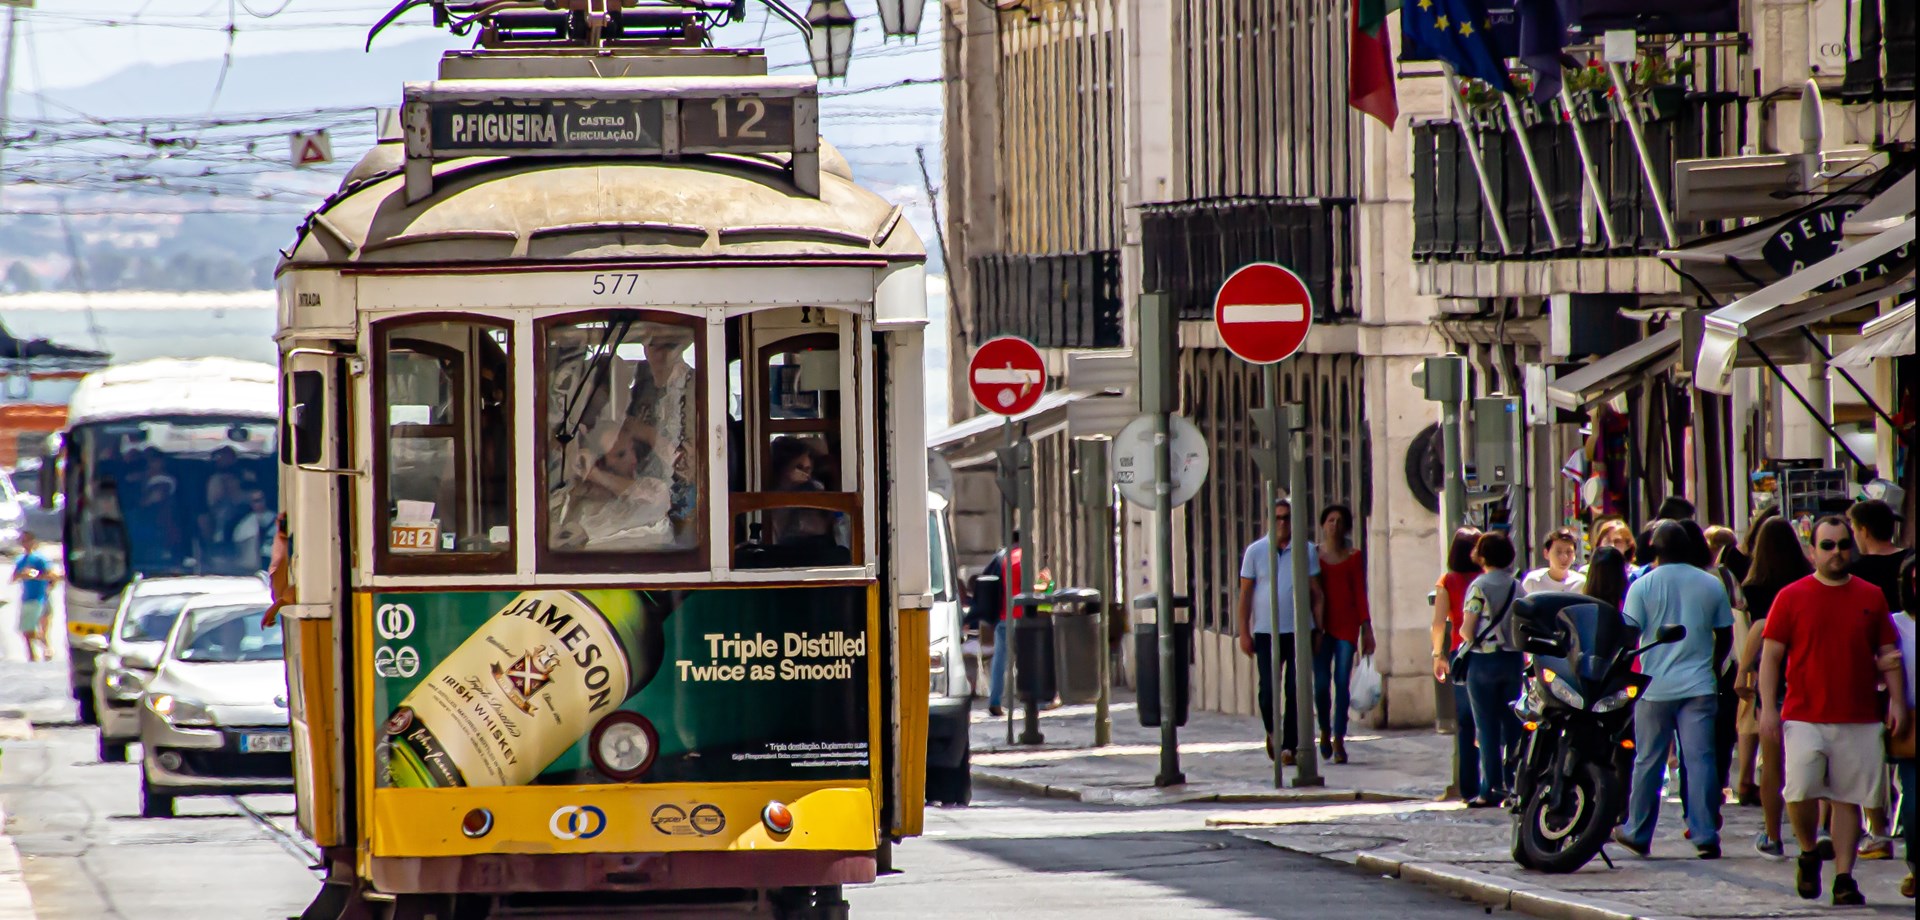 Explore Lisbon aboard the mythical Electric 28